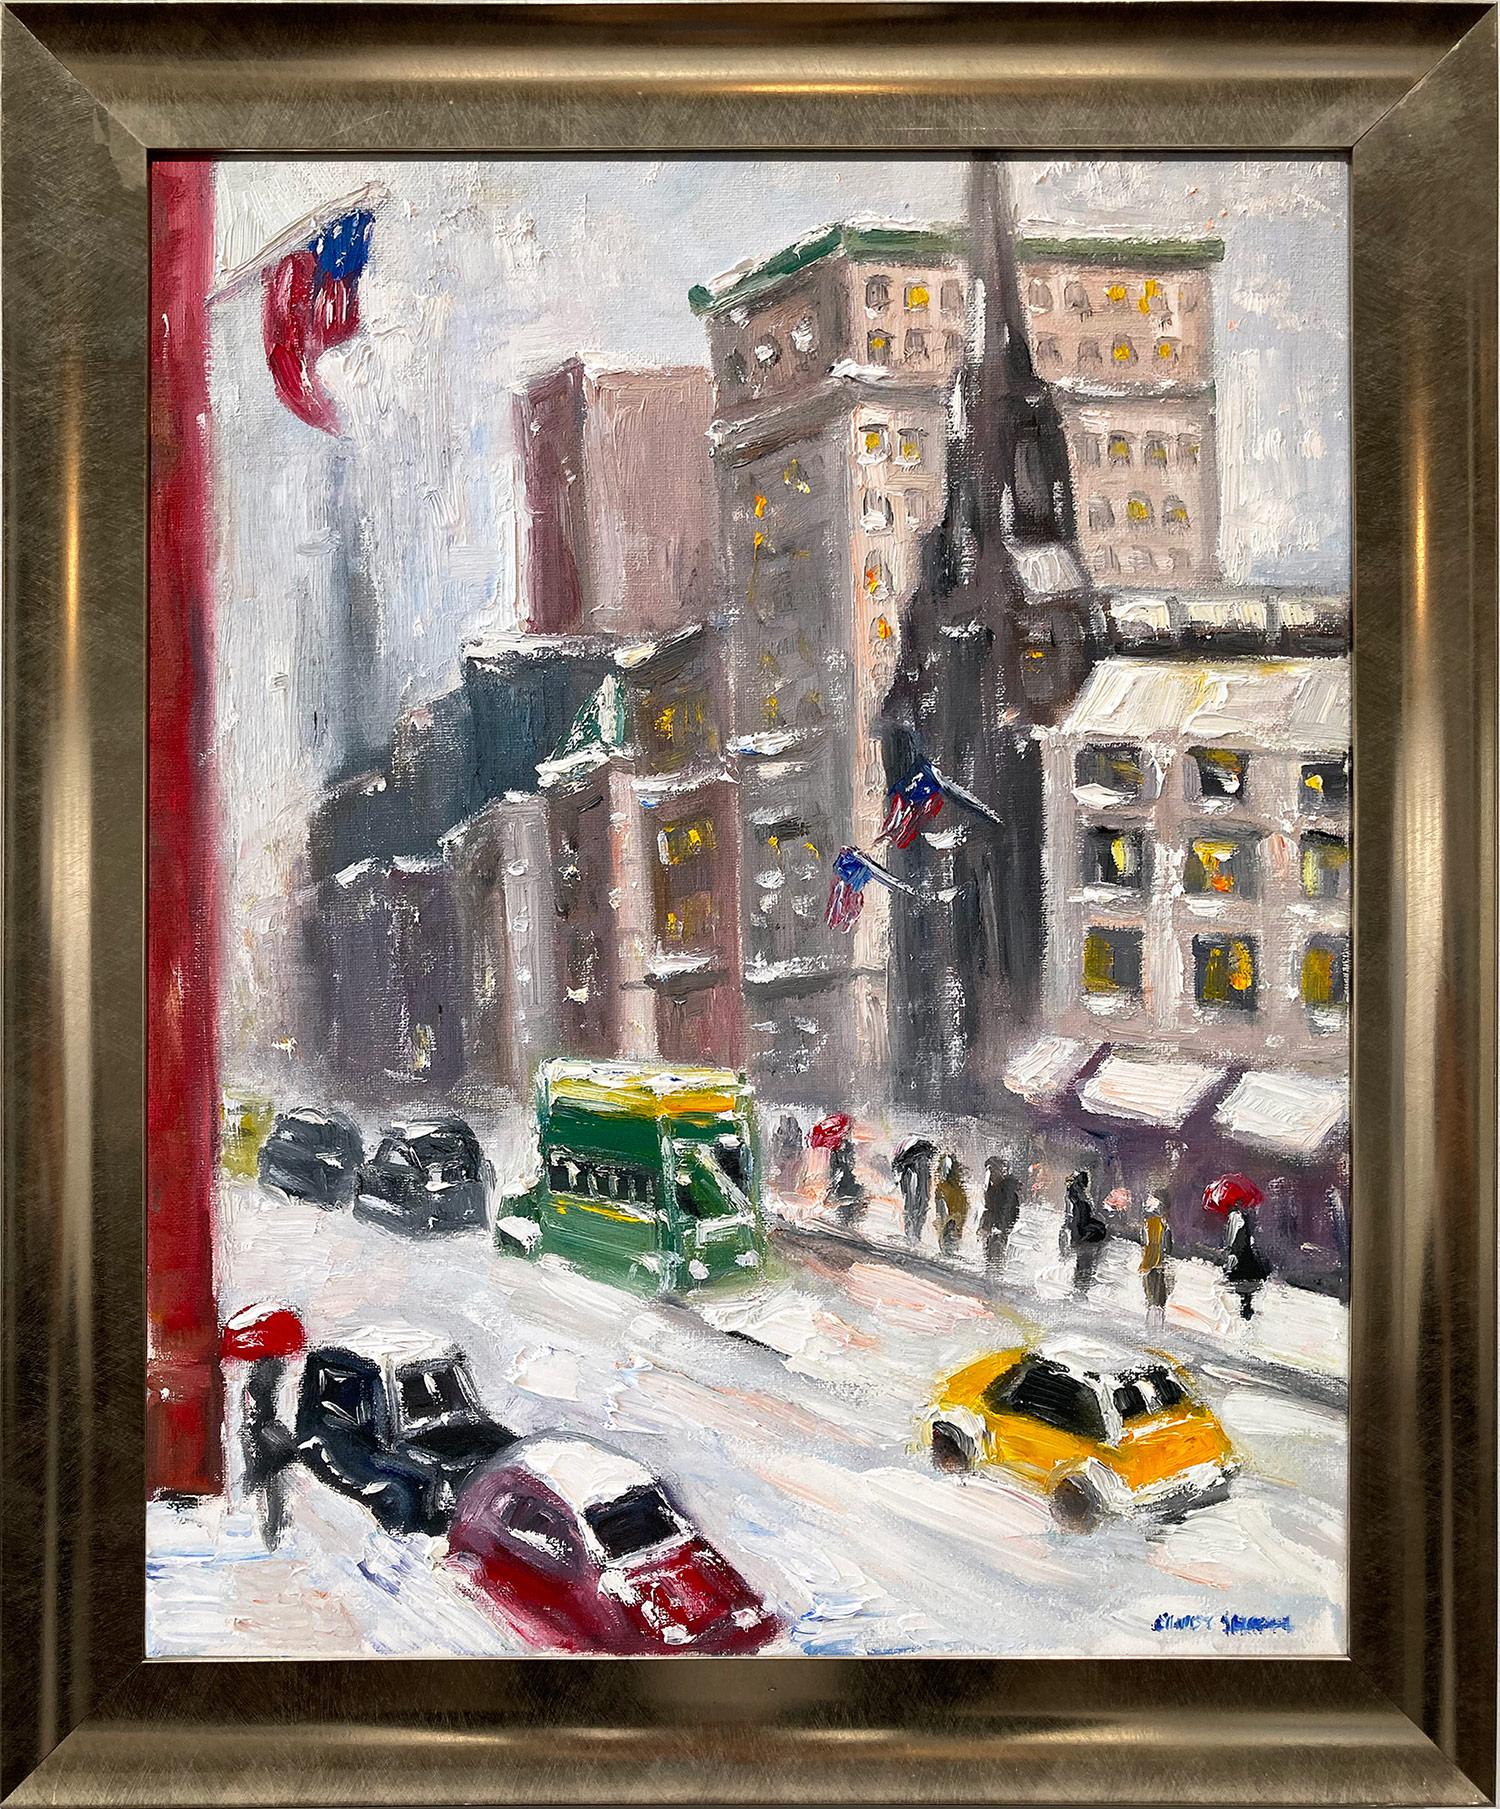 Cindy Shaoul Landscape Painting - "Snow by Trinity Church" Impressionistic Snow New York in style of Guy Wiggins